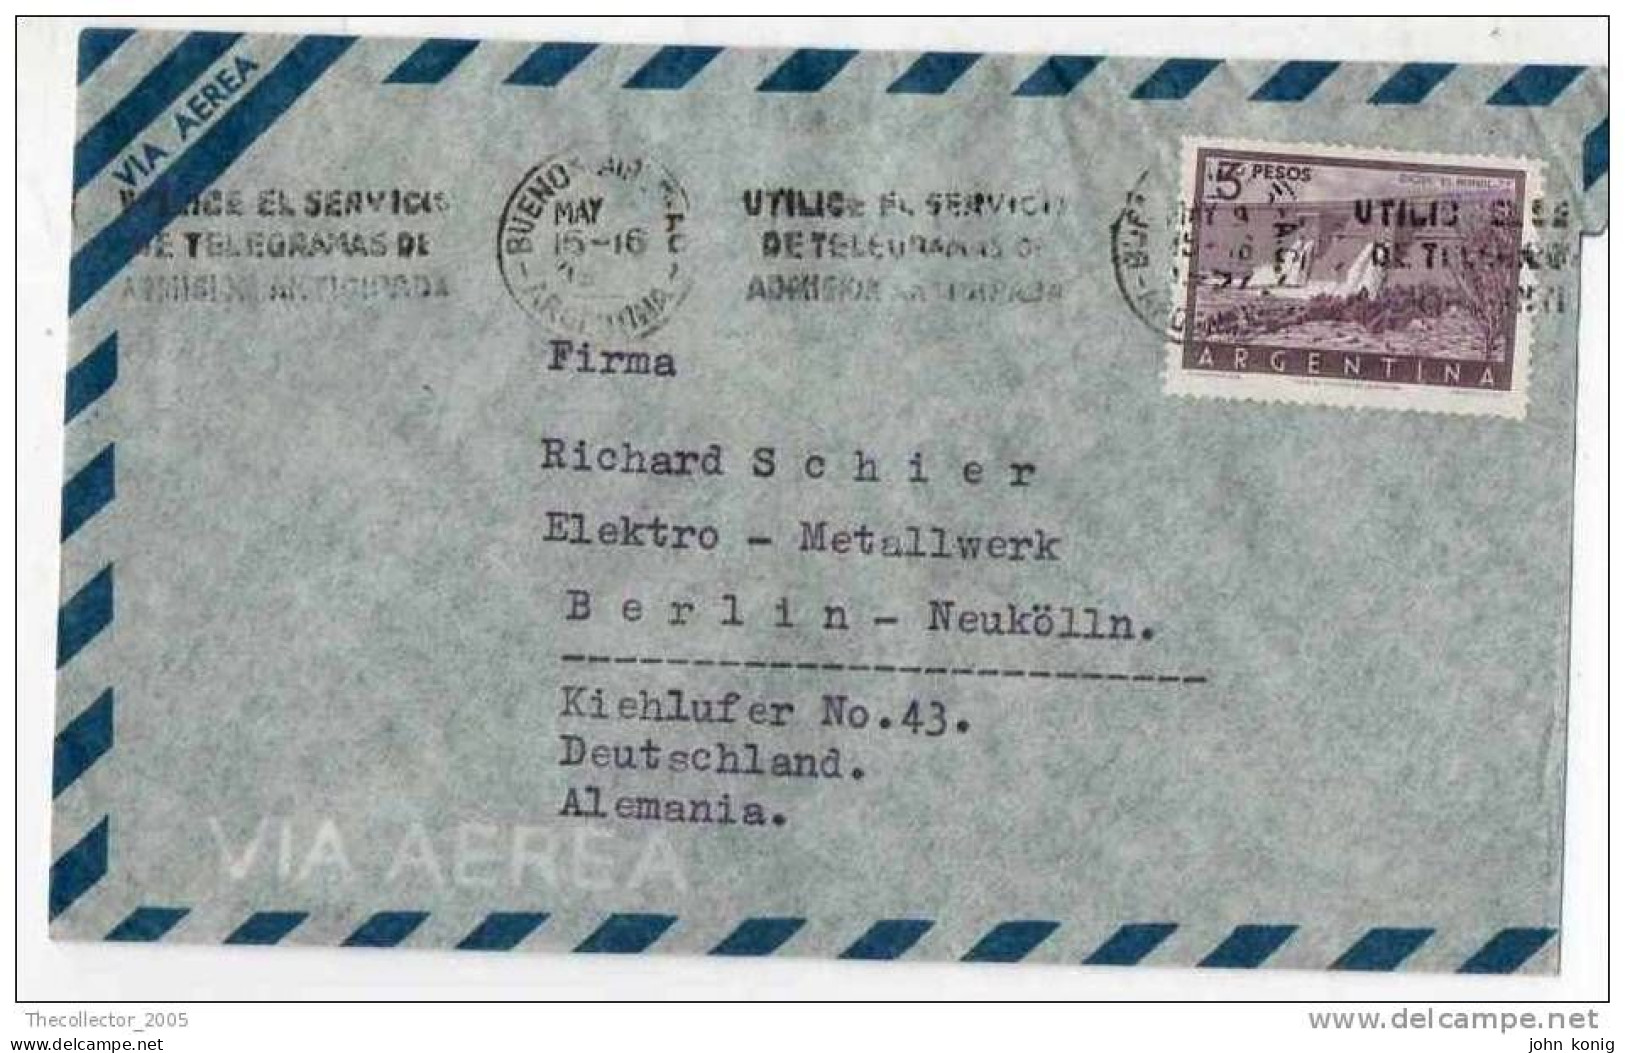 Lettera Busta Argentina-Argentinien Letter- Cover - Briefe- Posta Aerea Anni '50 (of '50s)-Air Mail-to Germany-Berlin - Luchtpost